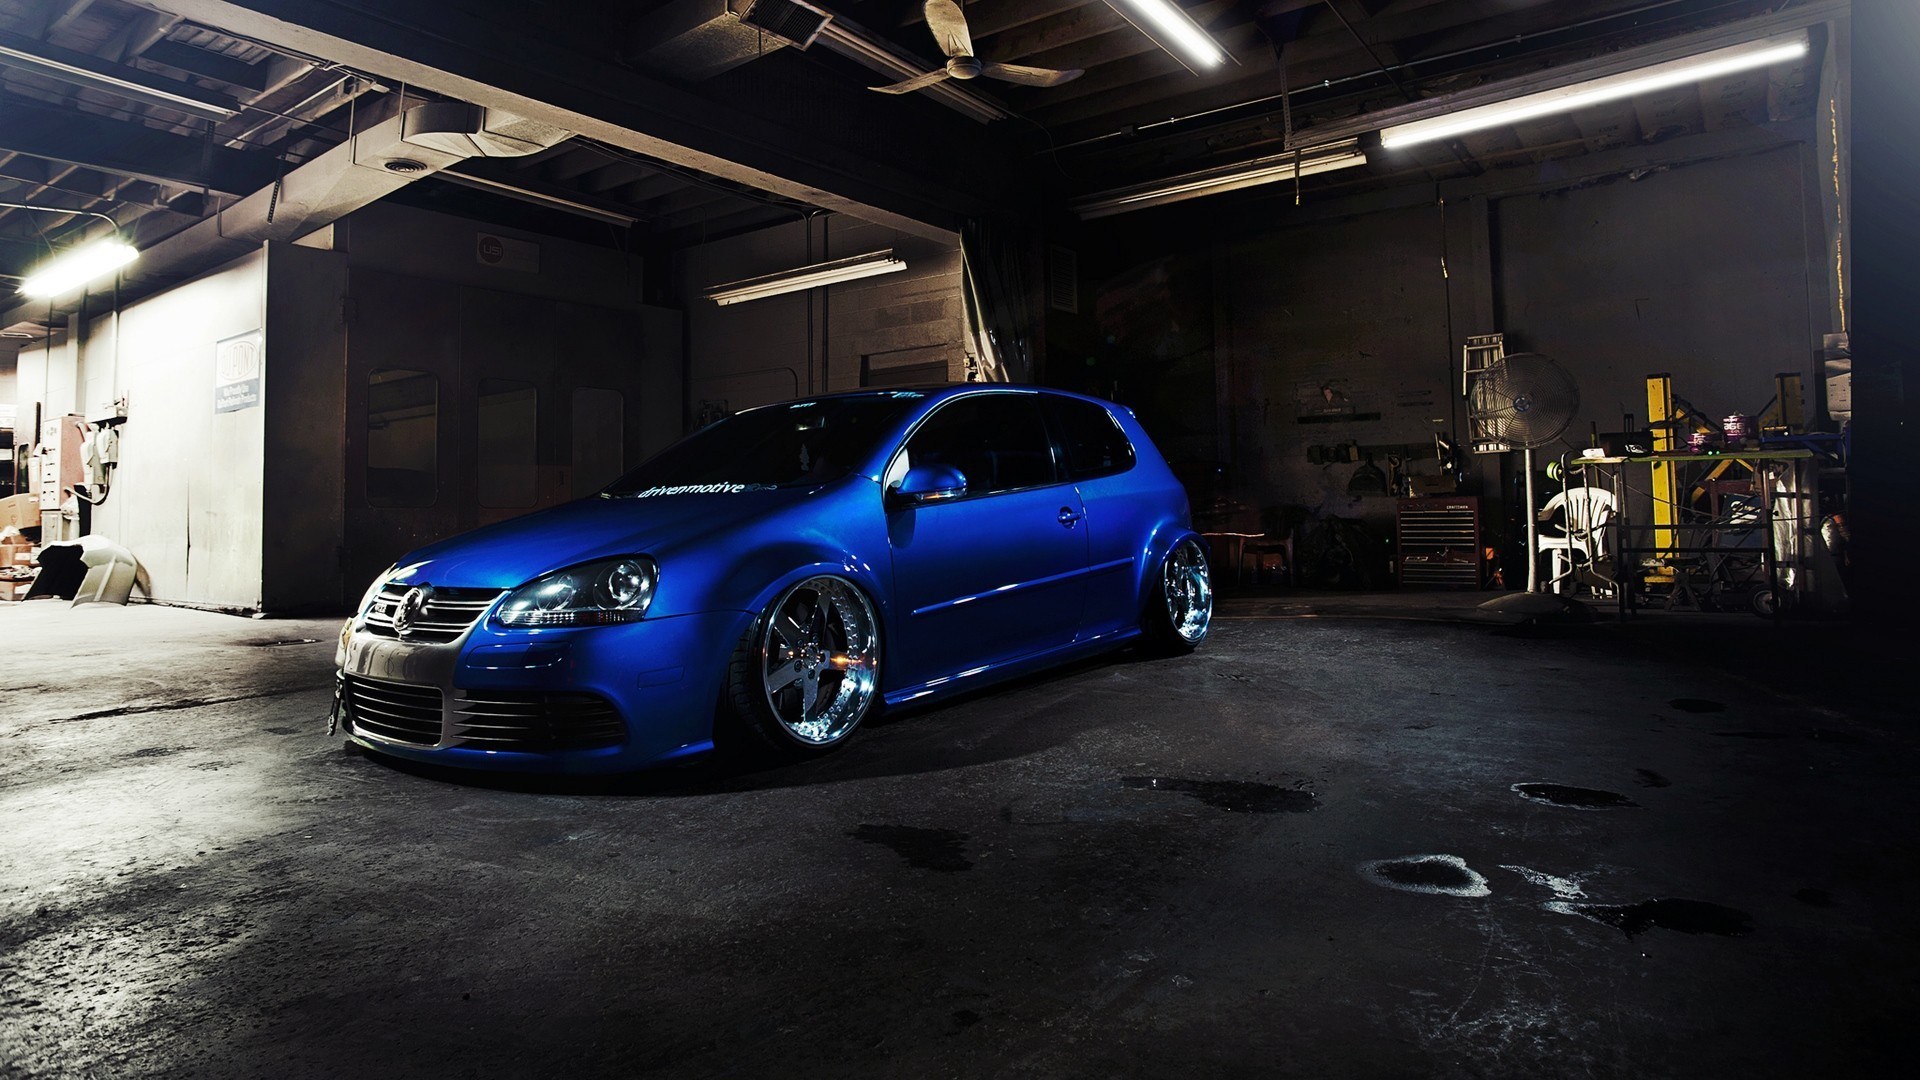 Download Volkswagen Golf R32 Photo pictures in high definition or